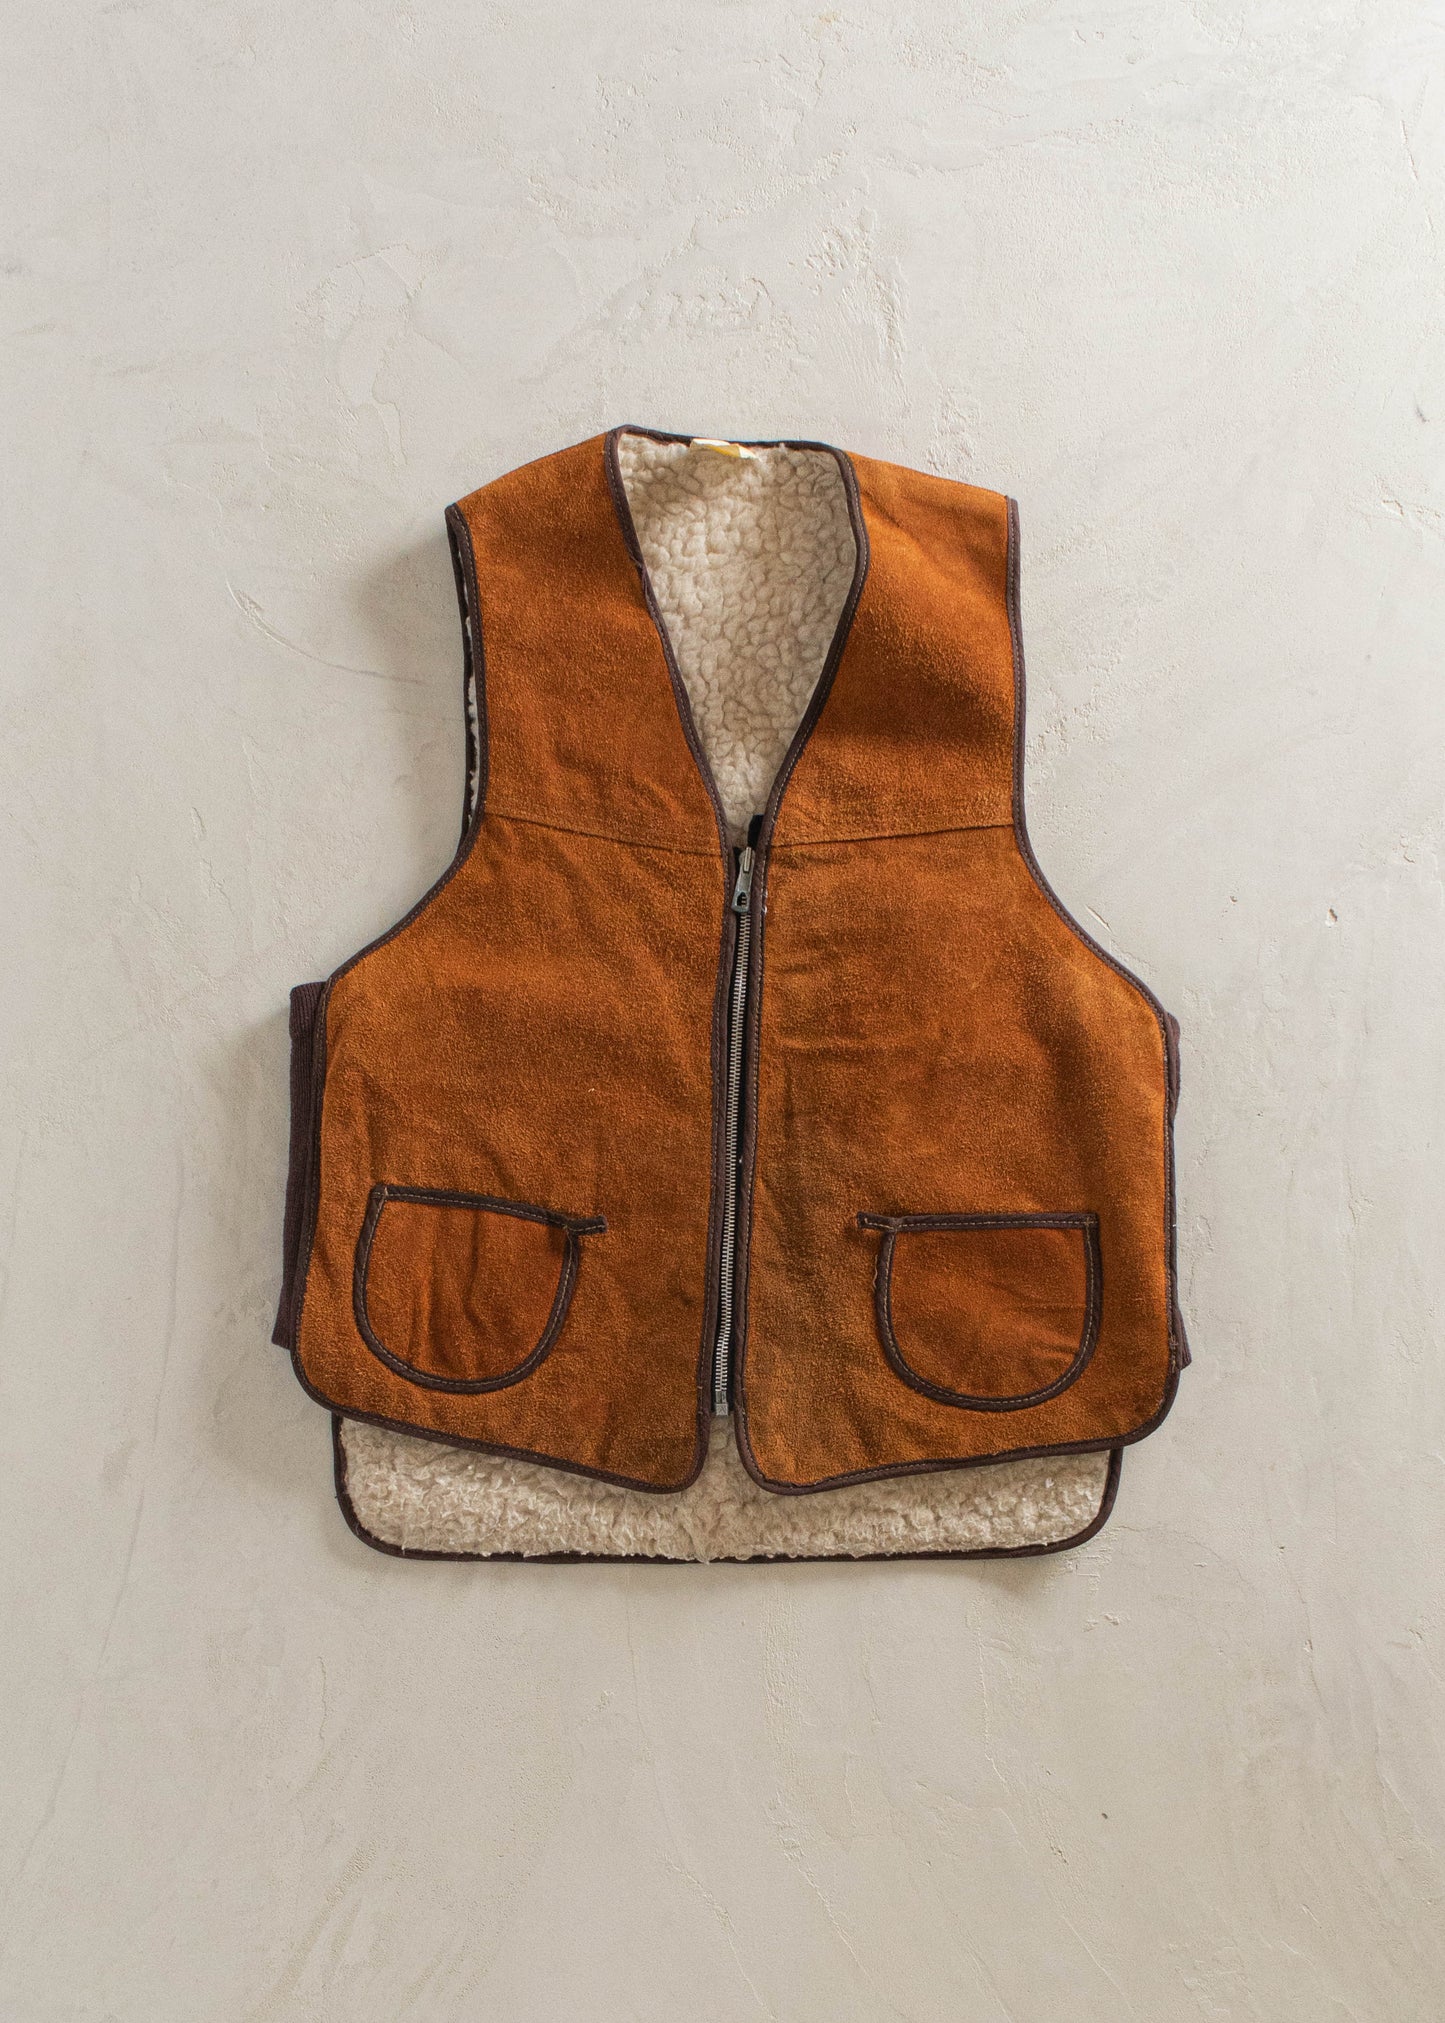 1970s Sherpa Lined Suede Vest Size S/M